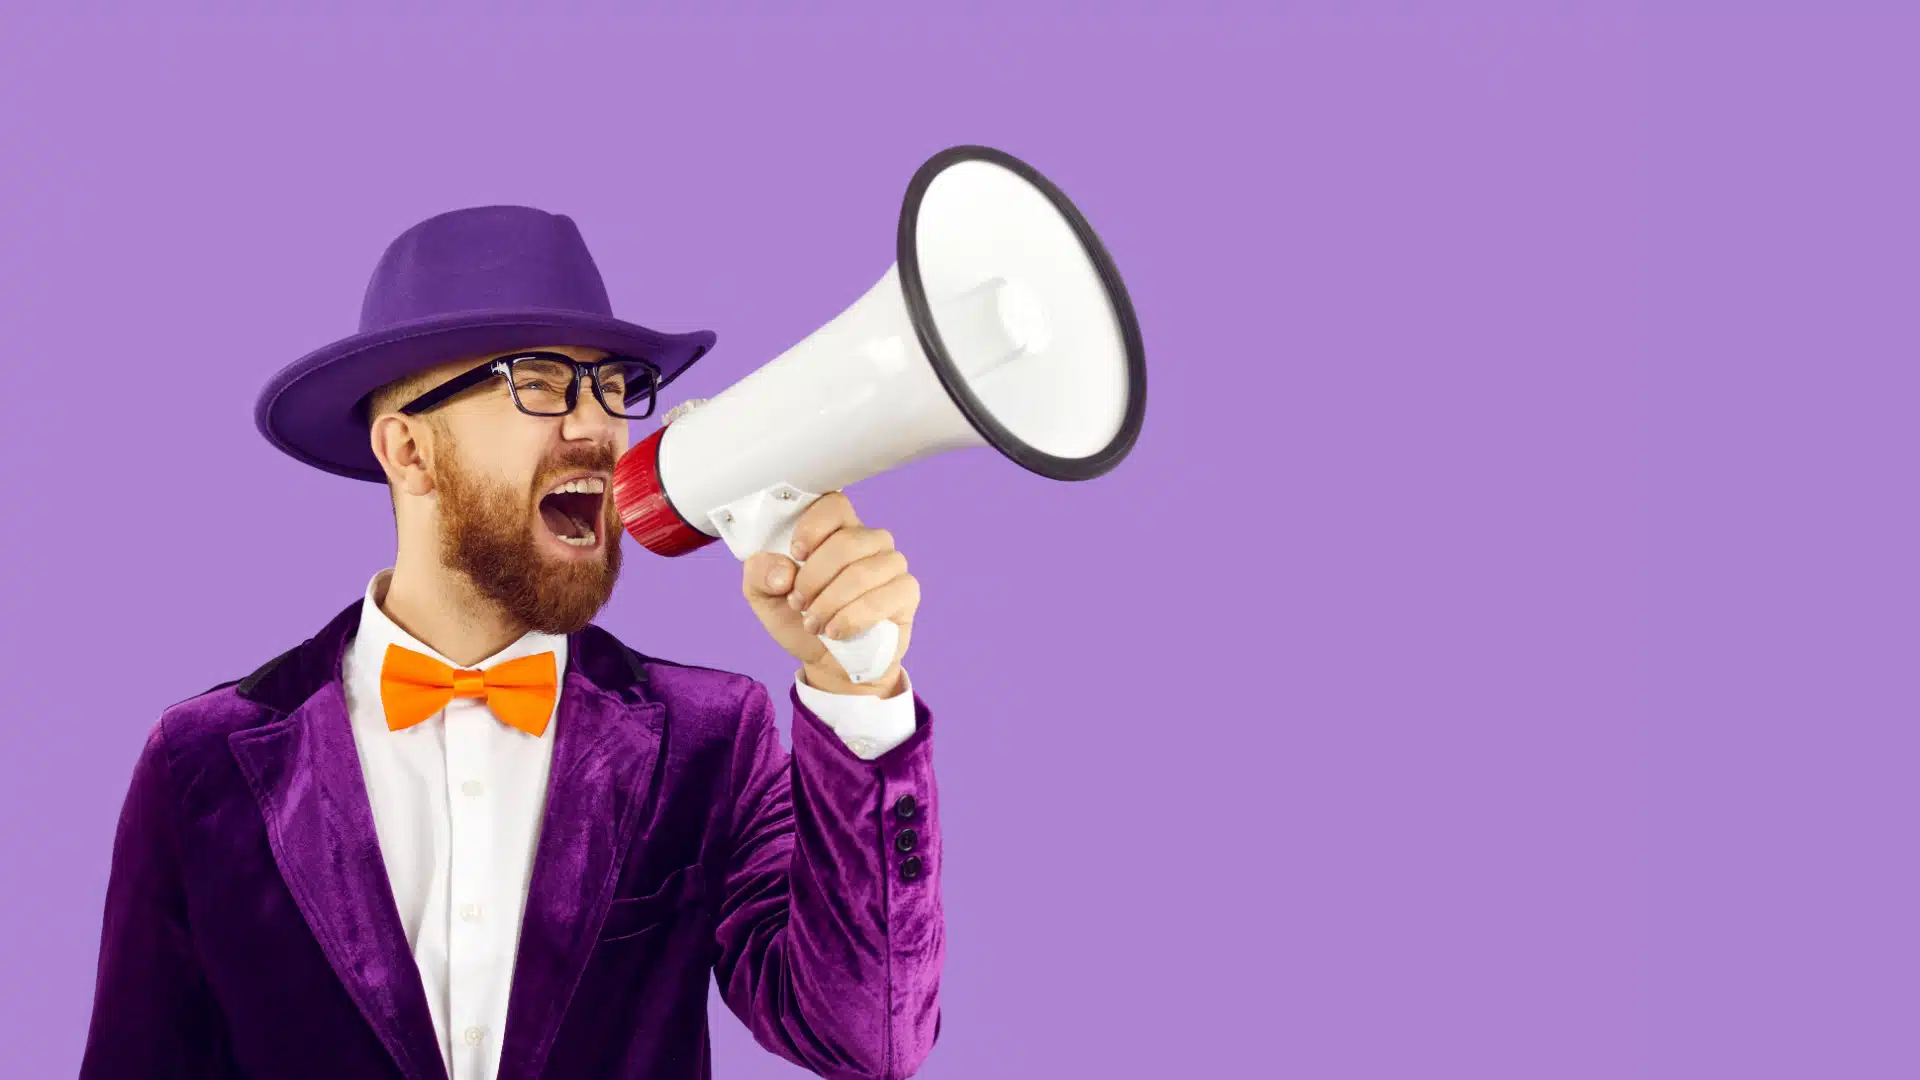 A man in a loud purple suit shouts into a megaphone to promote something. 